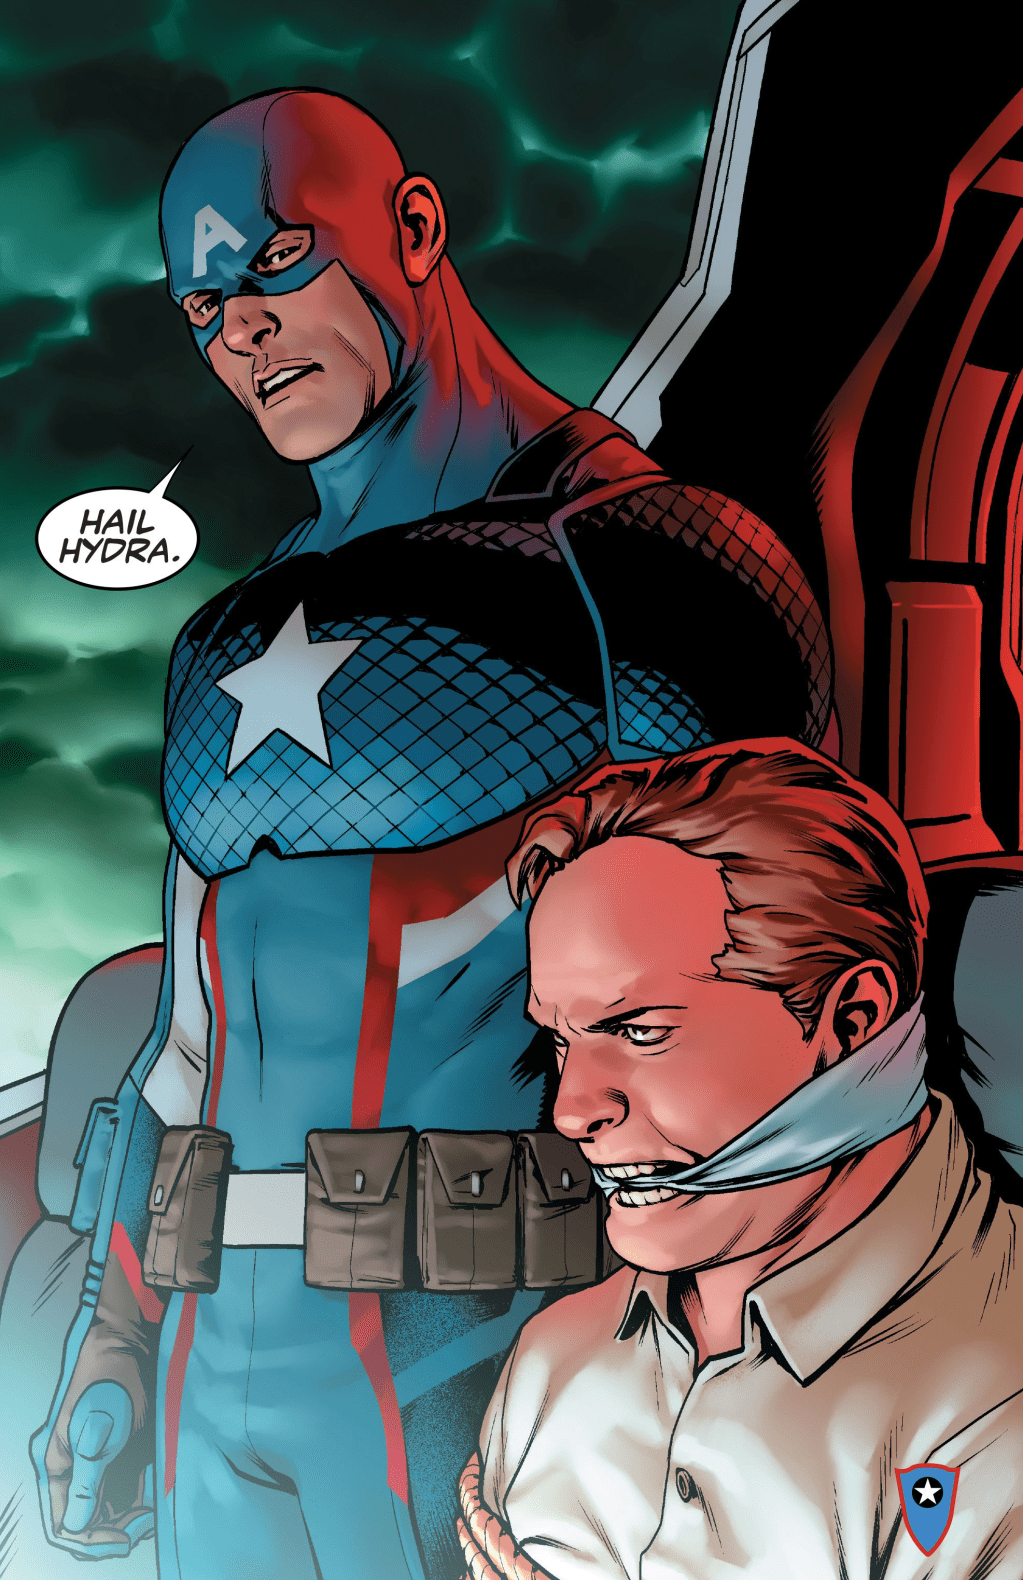 The Star-Spangled Avenger reveals himself to be an agent of Hydra in Captain America: Steve Rogers Vol. 1 #1 (2016), Marvel Comics. Words by Nick Spencer, art by Jesús Saíz and Joe Caramagna.